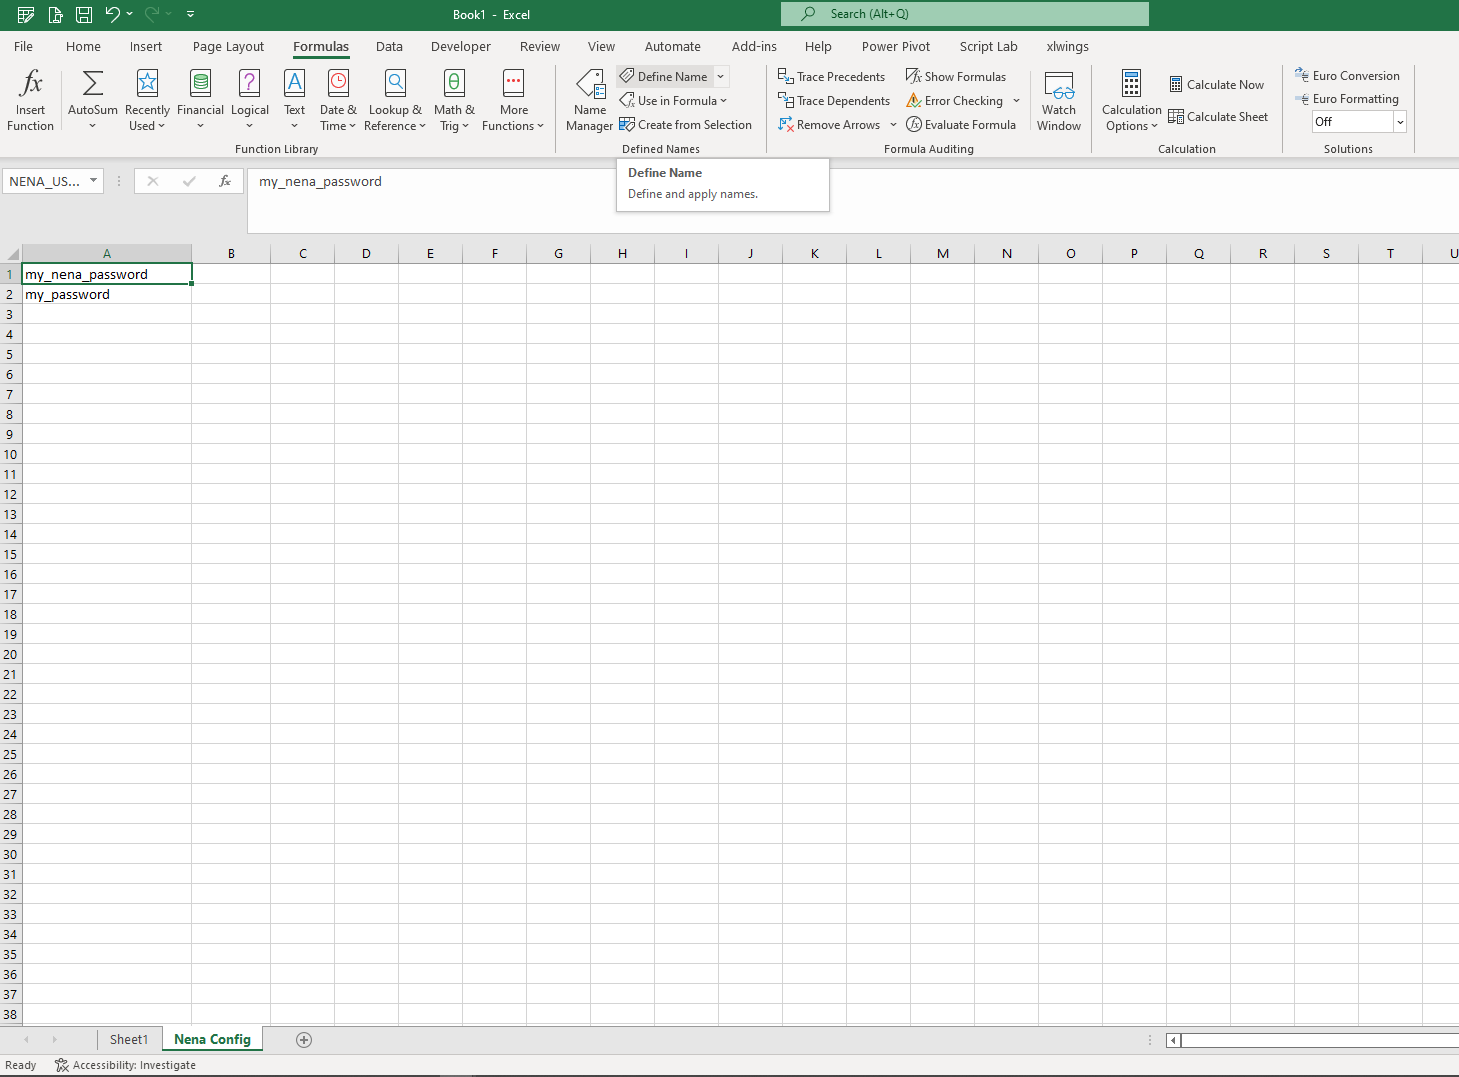 _images/excel_optional_01.png